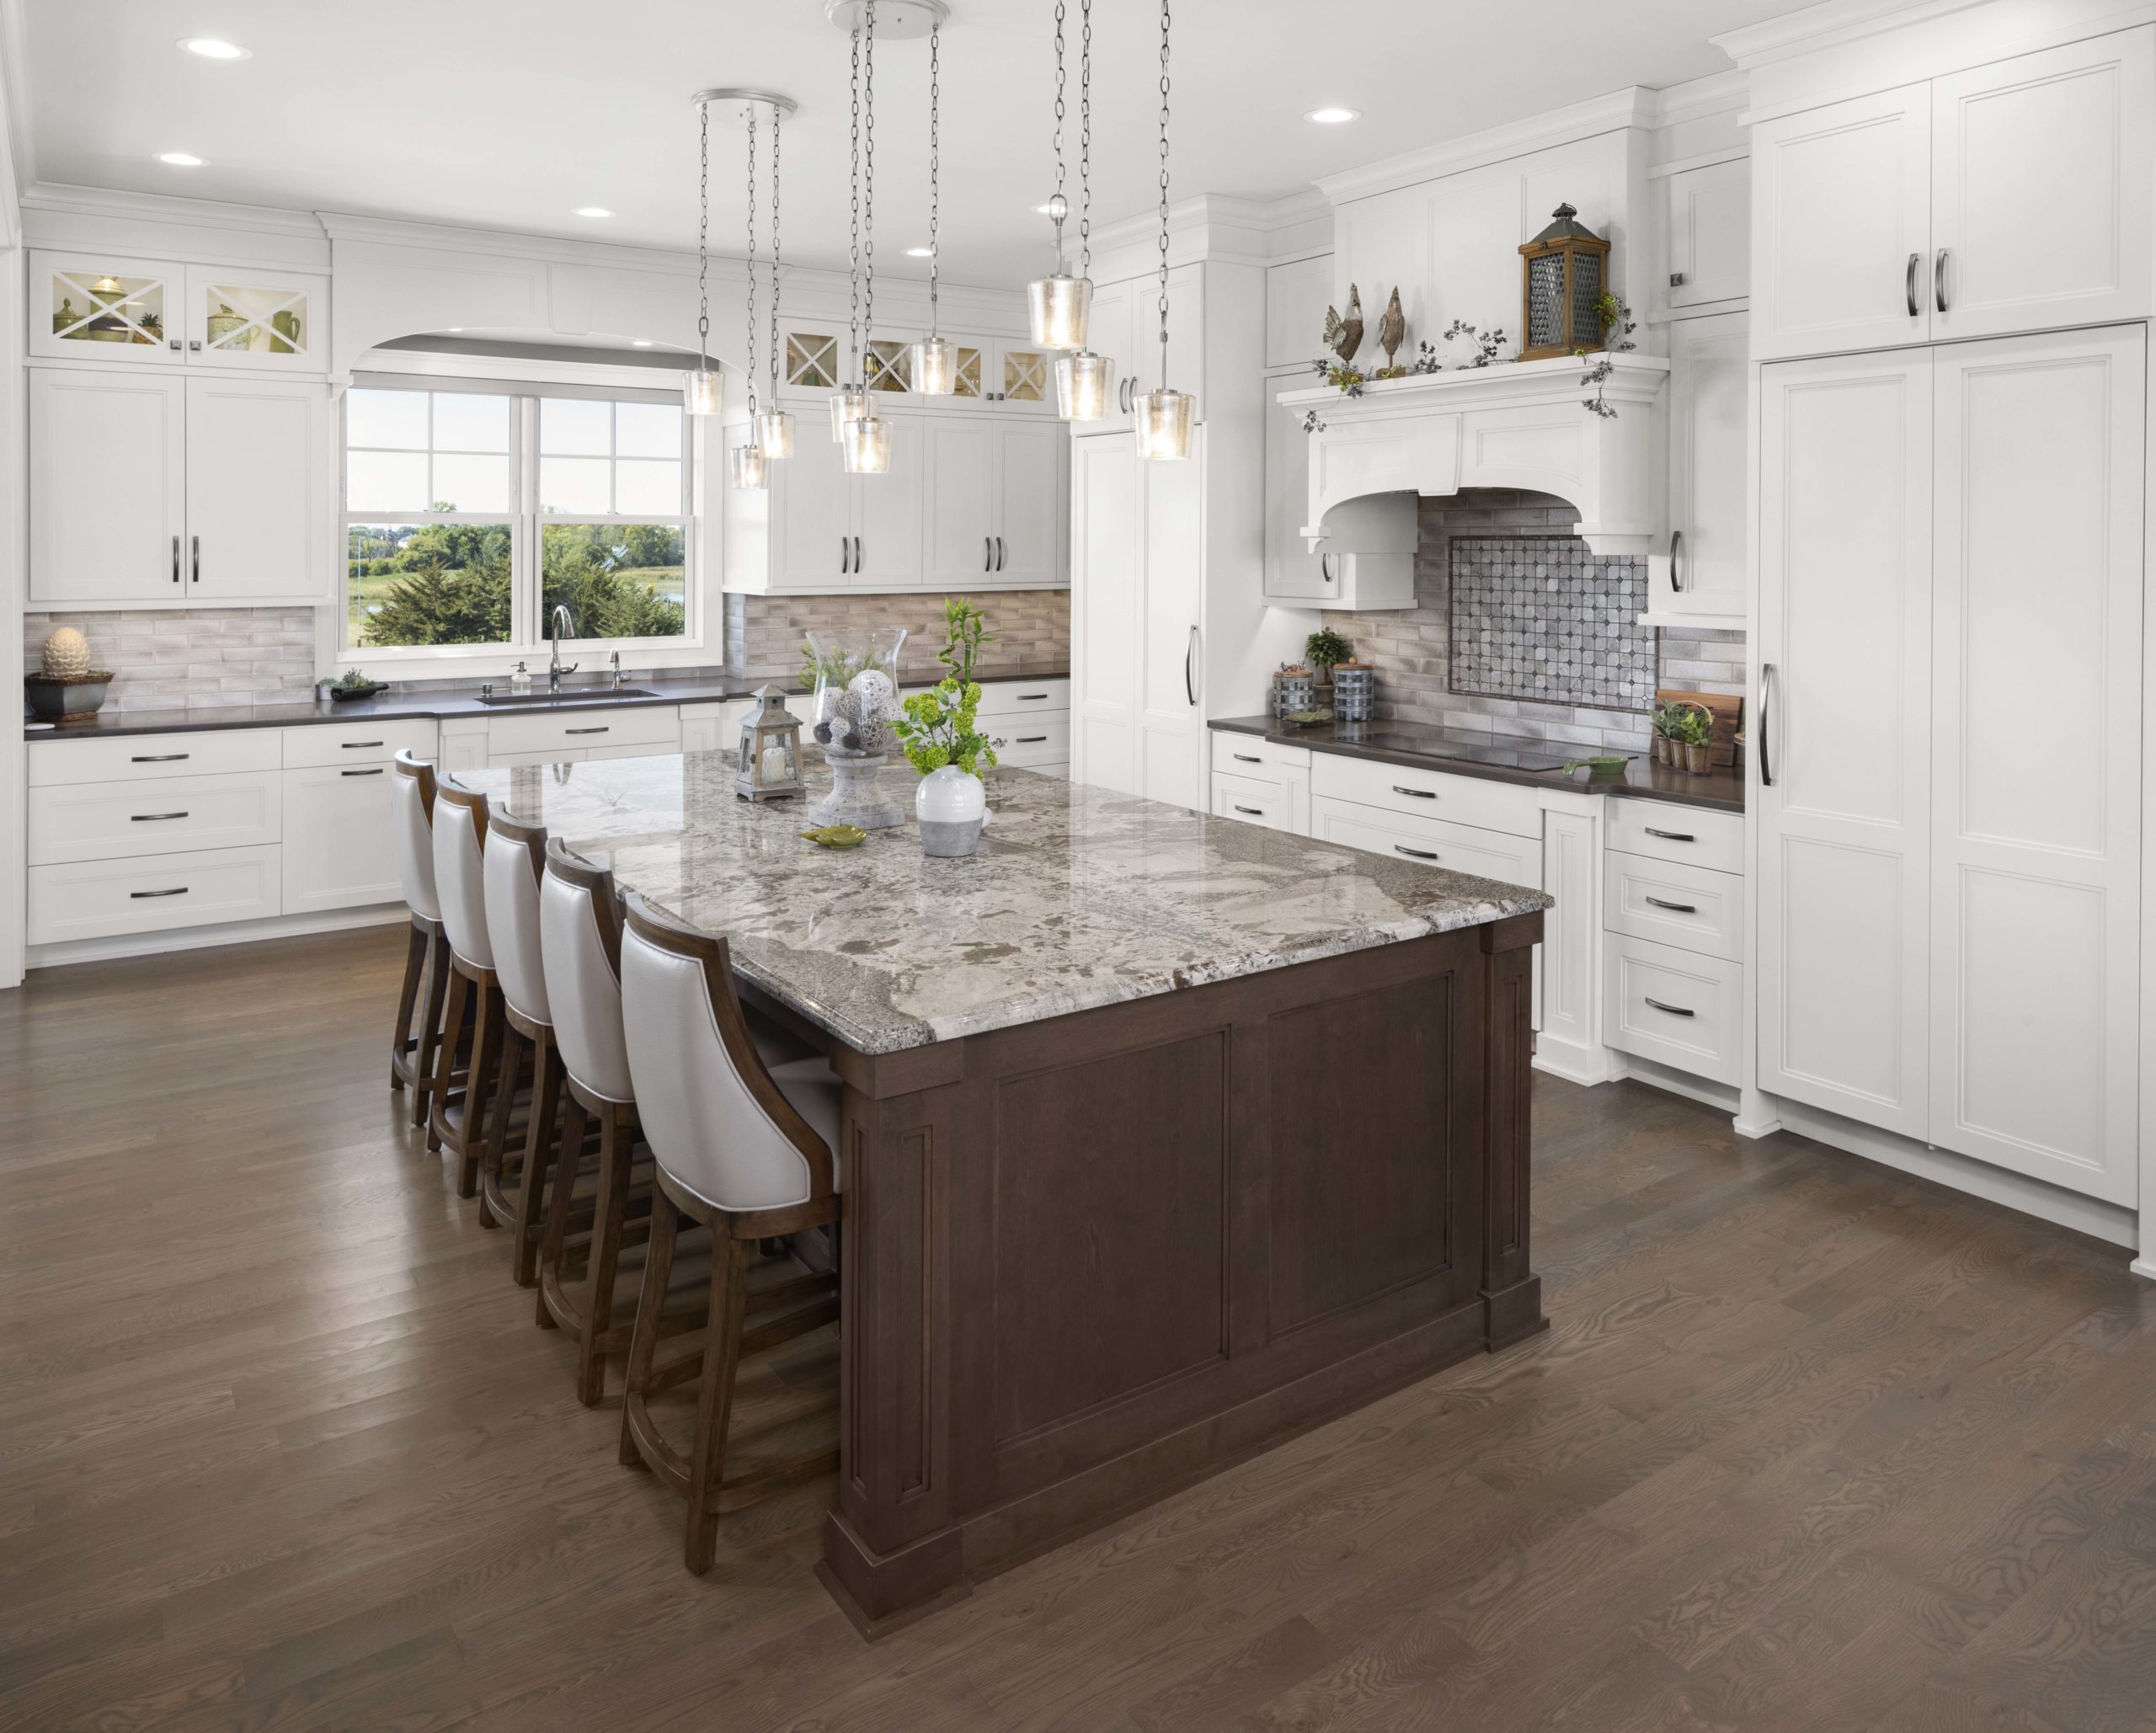 A prairie transitional custom home with a large kitchen featuring white cabinets and a center island.